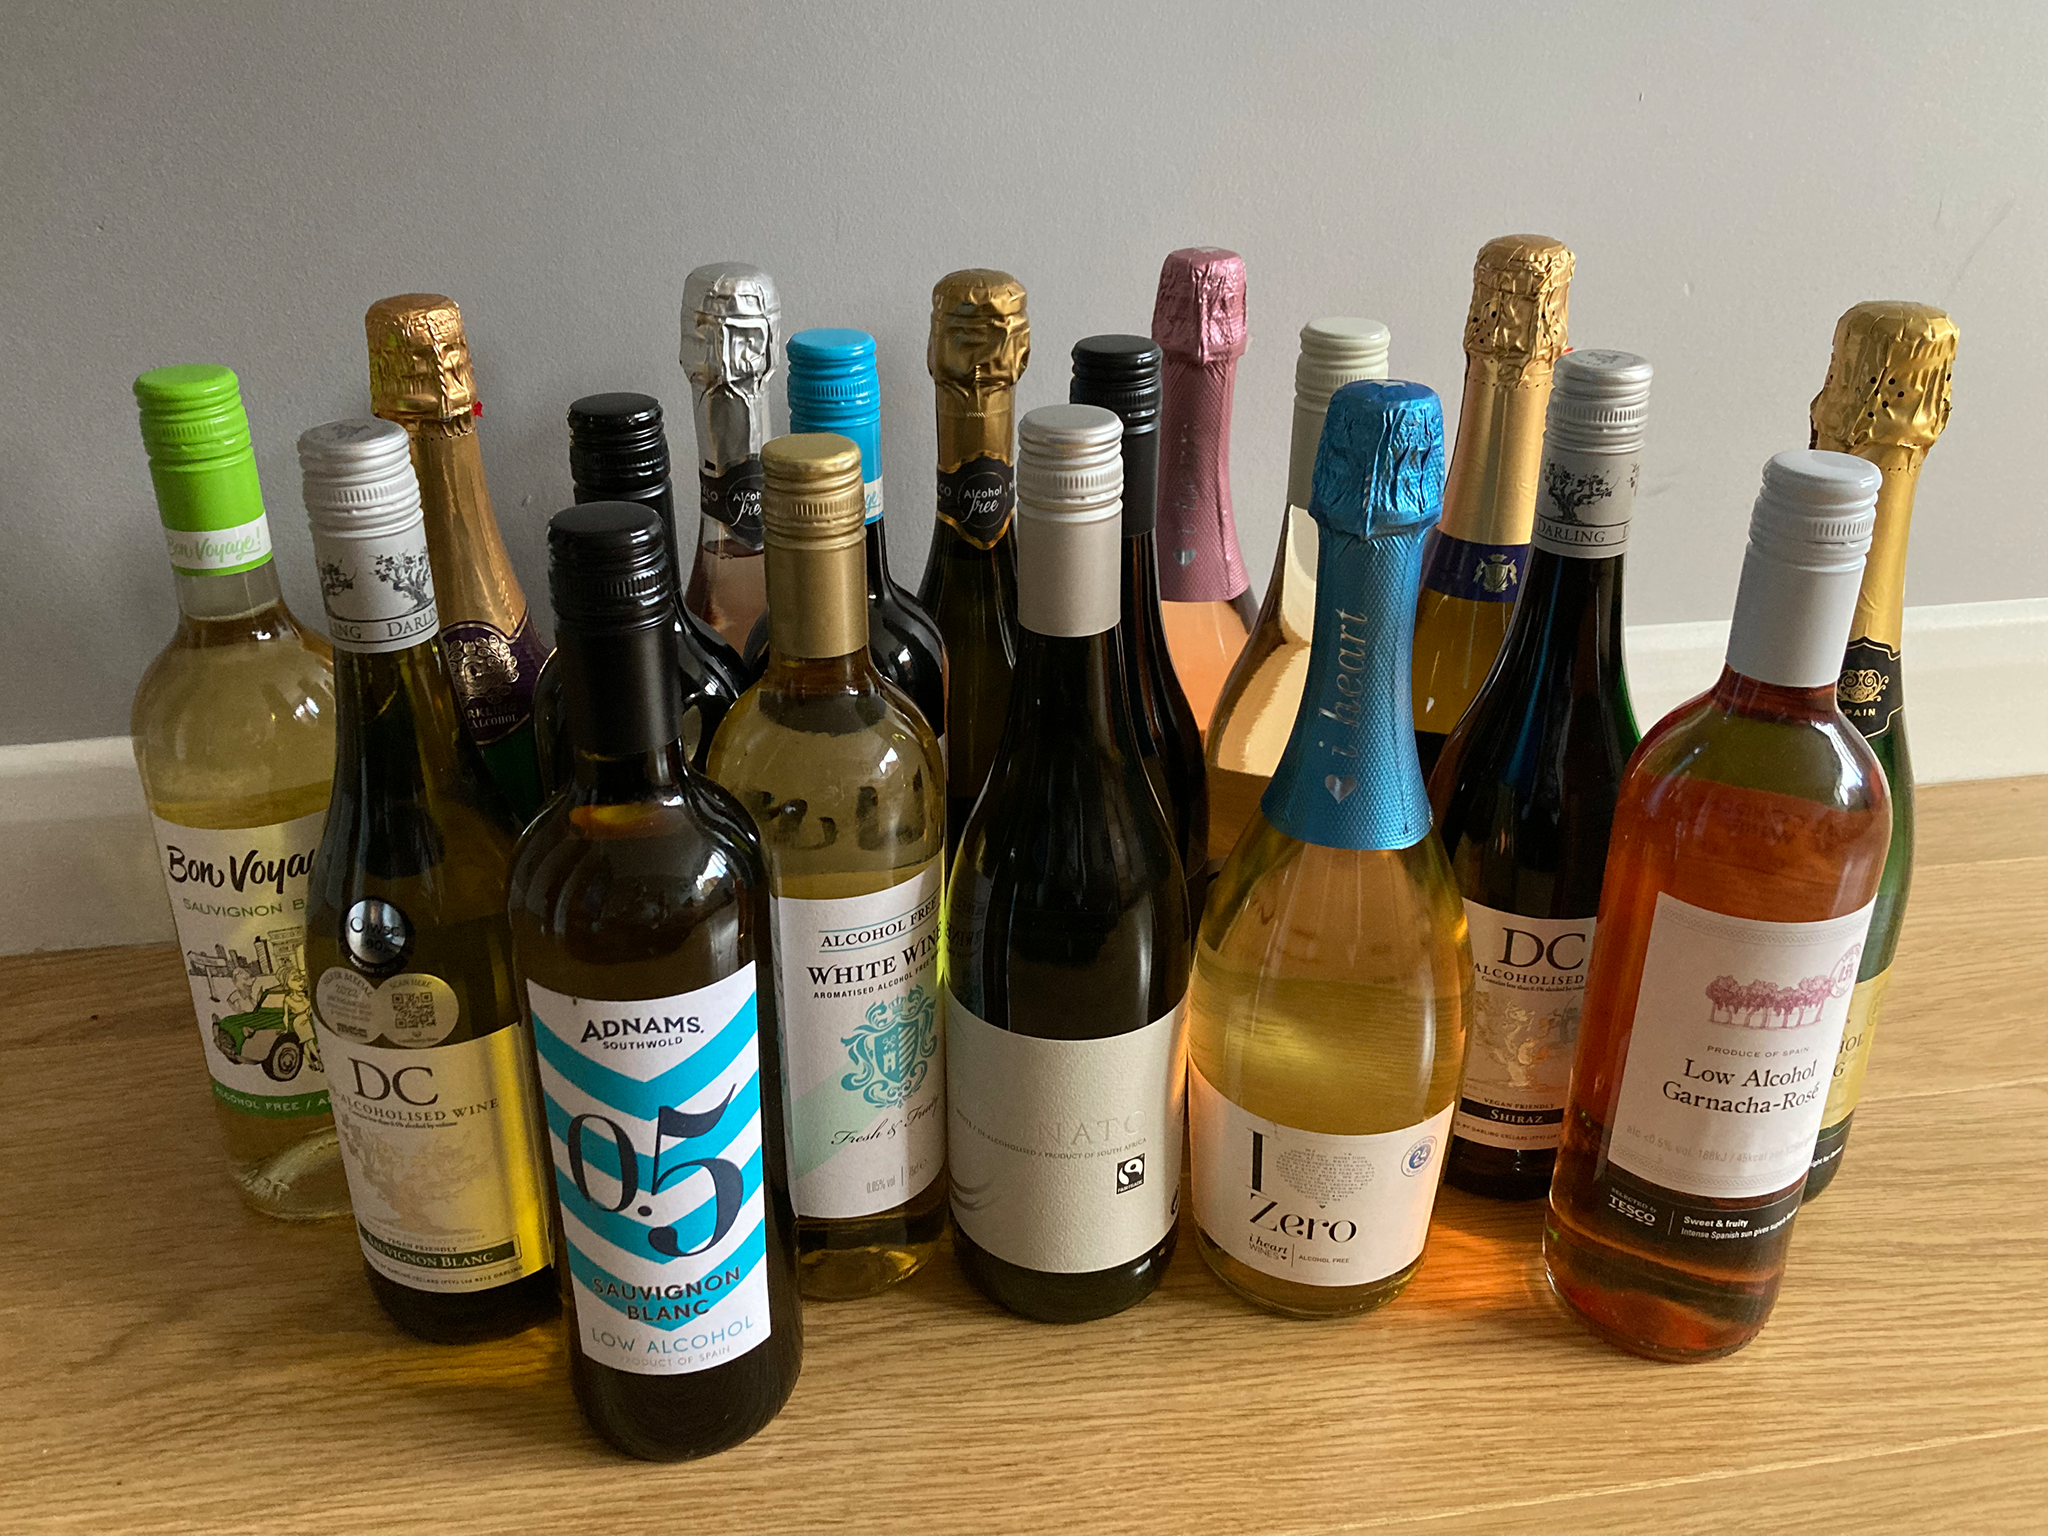 We tasted a range of low-alcohol wines before choosing our favourites